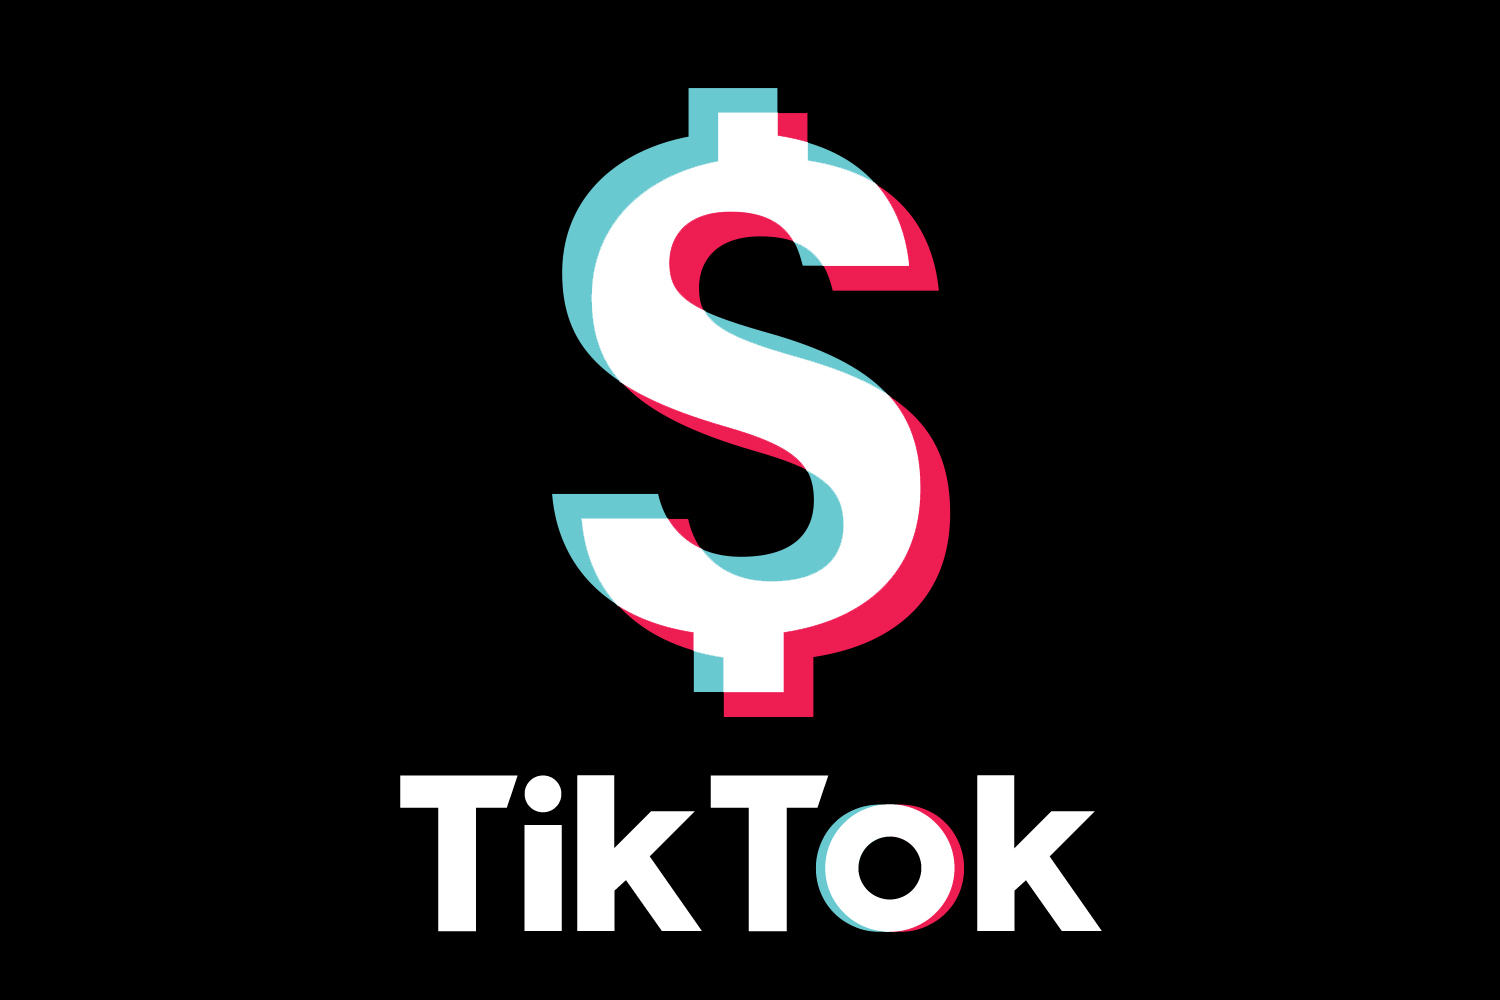 Can I buy shares or stock in TikTok?